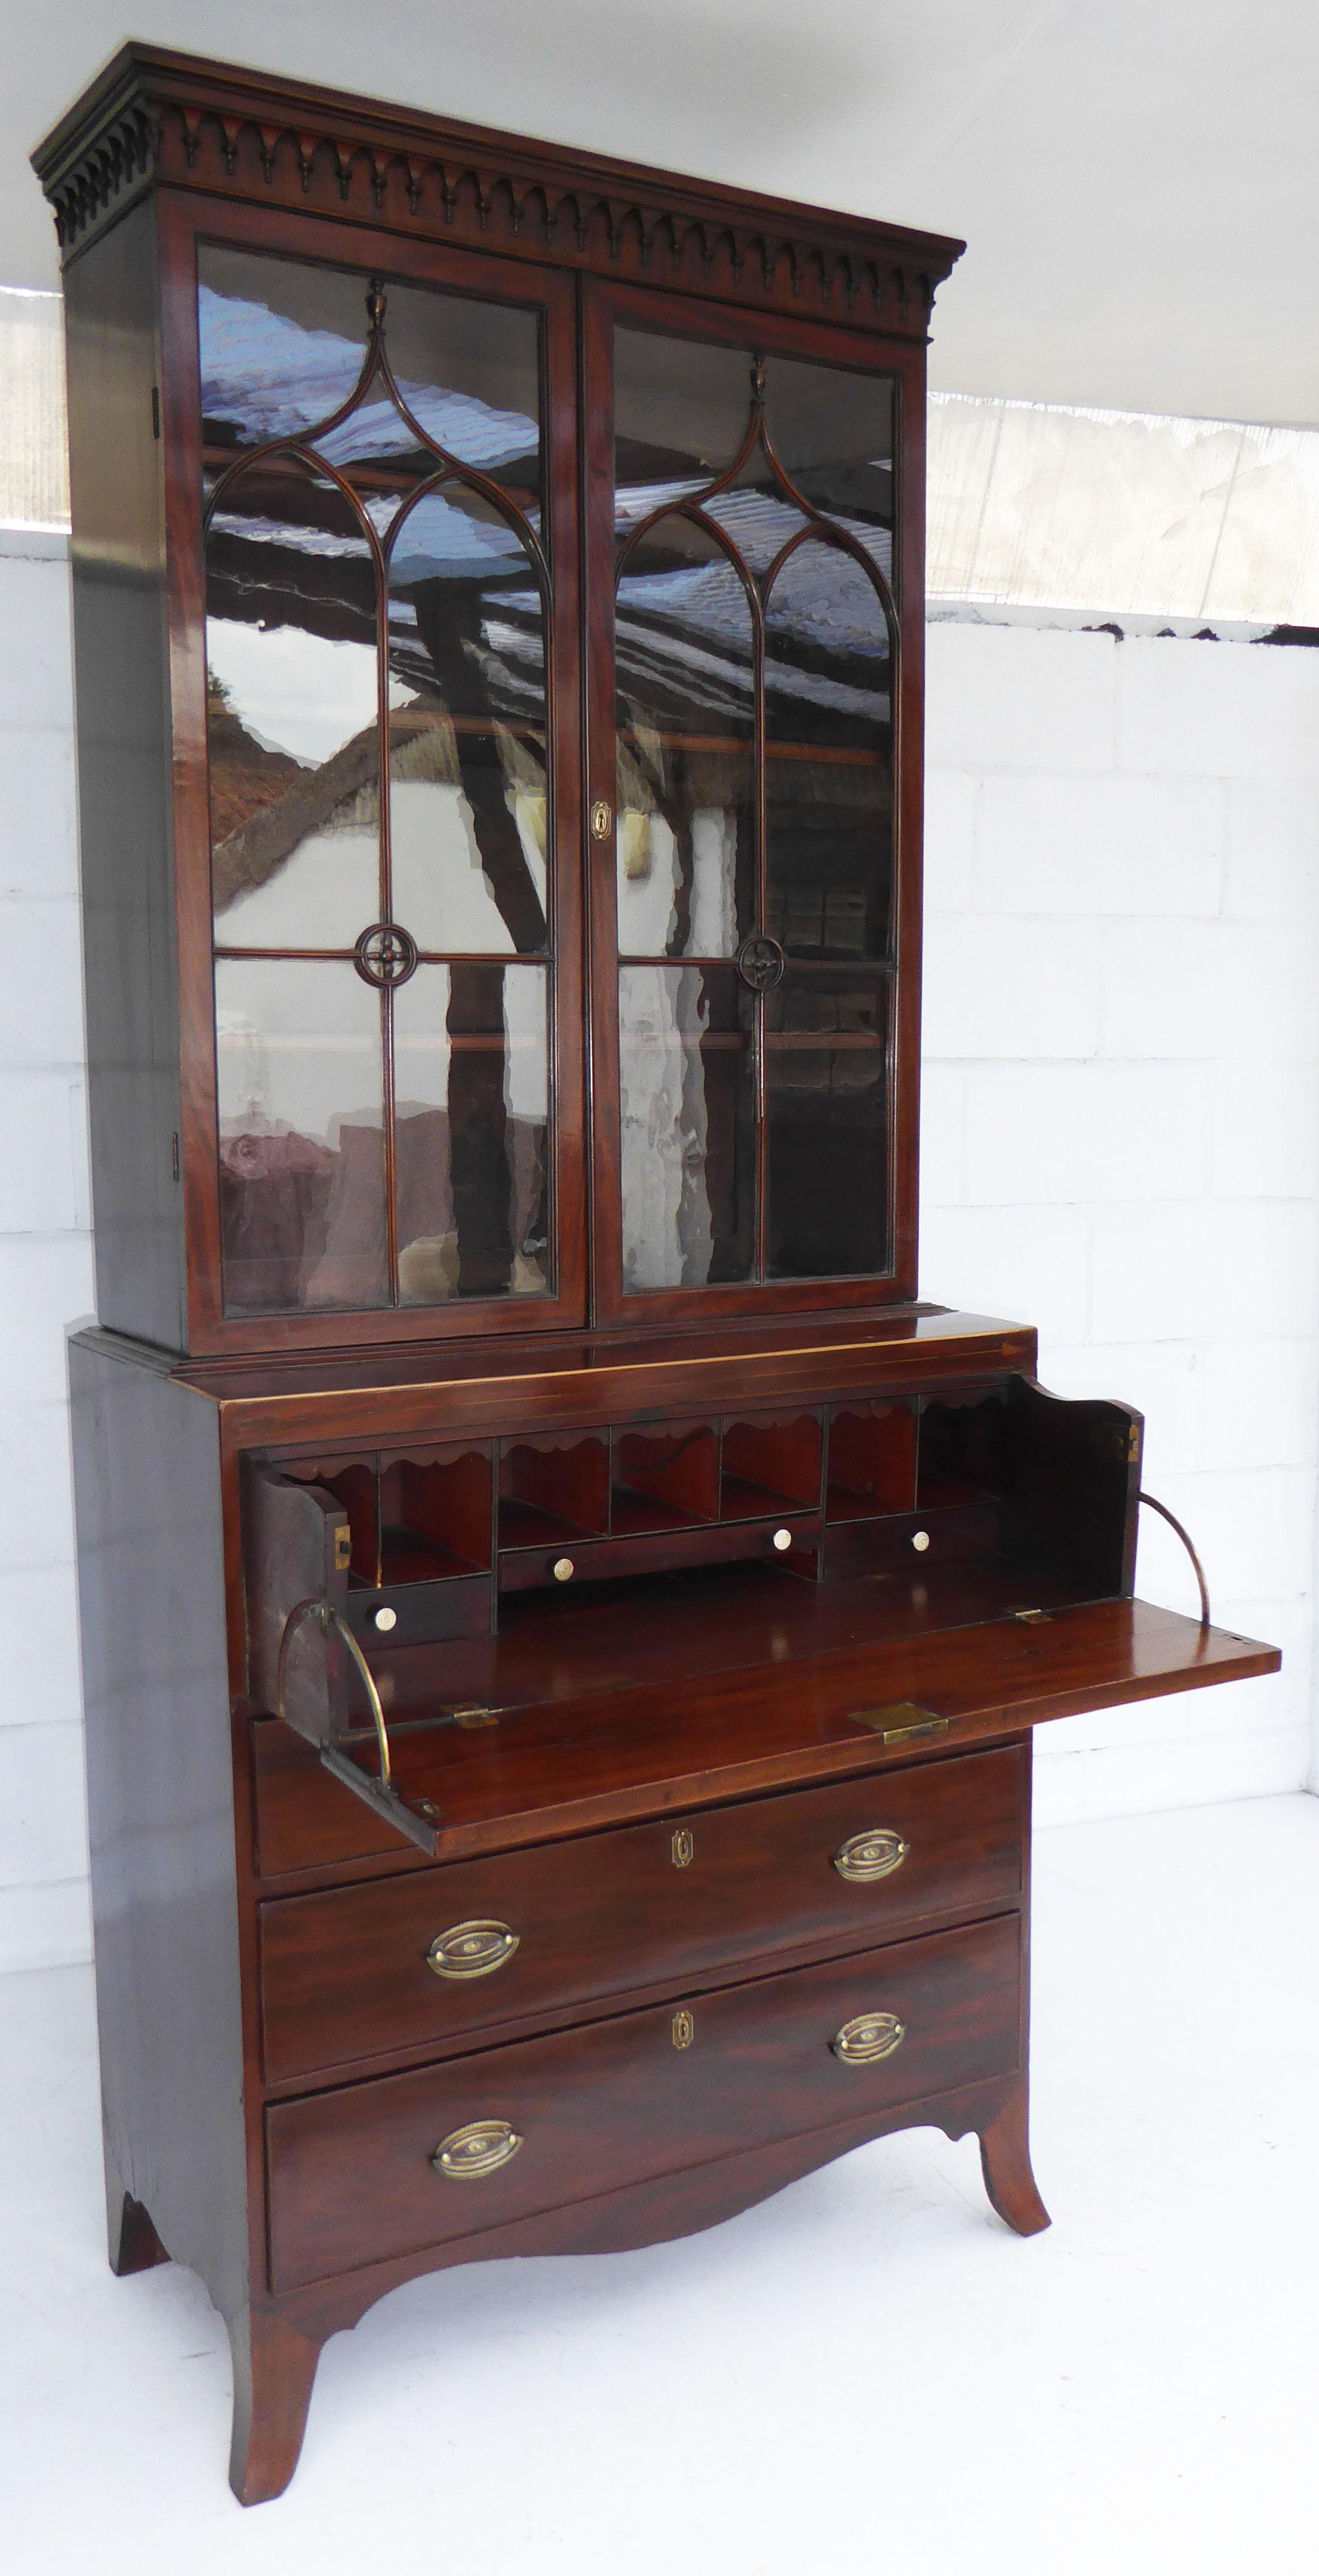 For sale is a good quality Regency mahogany secretaire bookcase of small proportions. The top of the bookcase has glazed doors, opening to reveal adjustable shelves. Below this there is a large drawer with a drop front which opens to show a fully